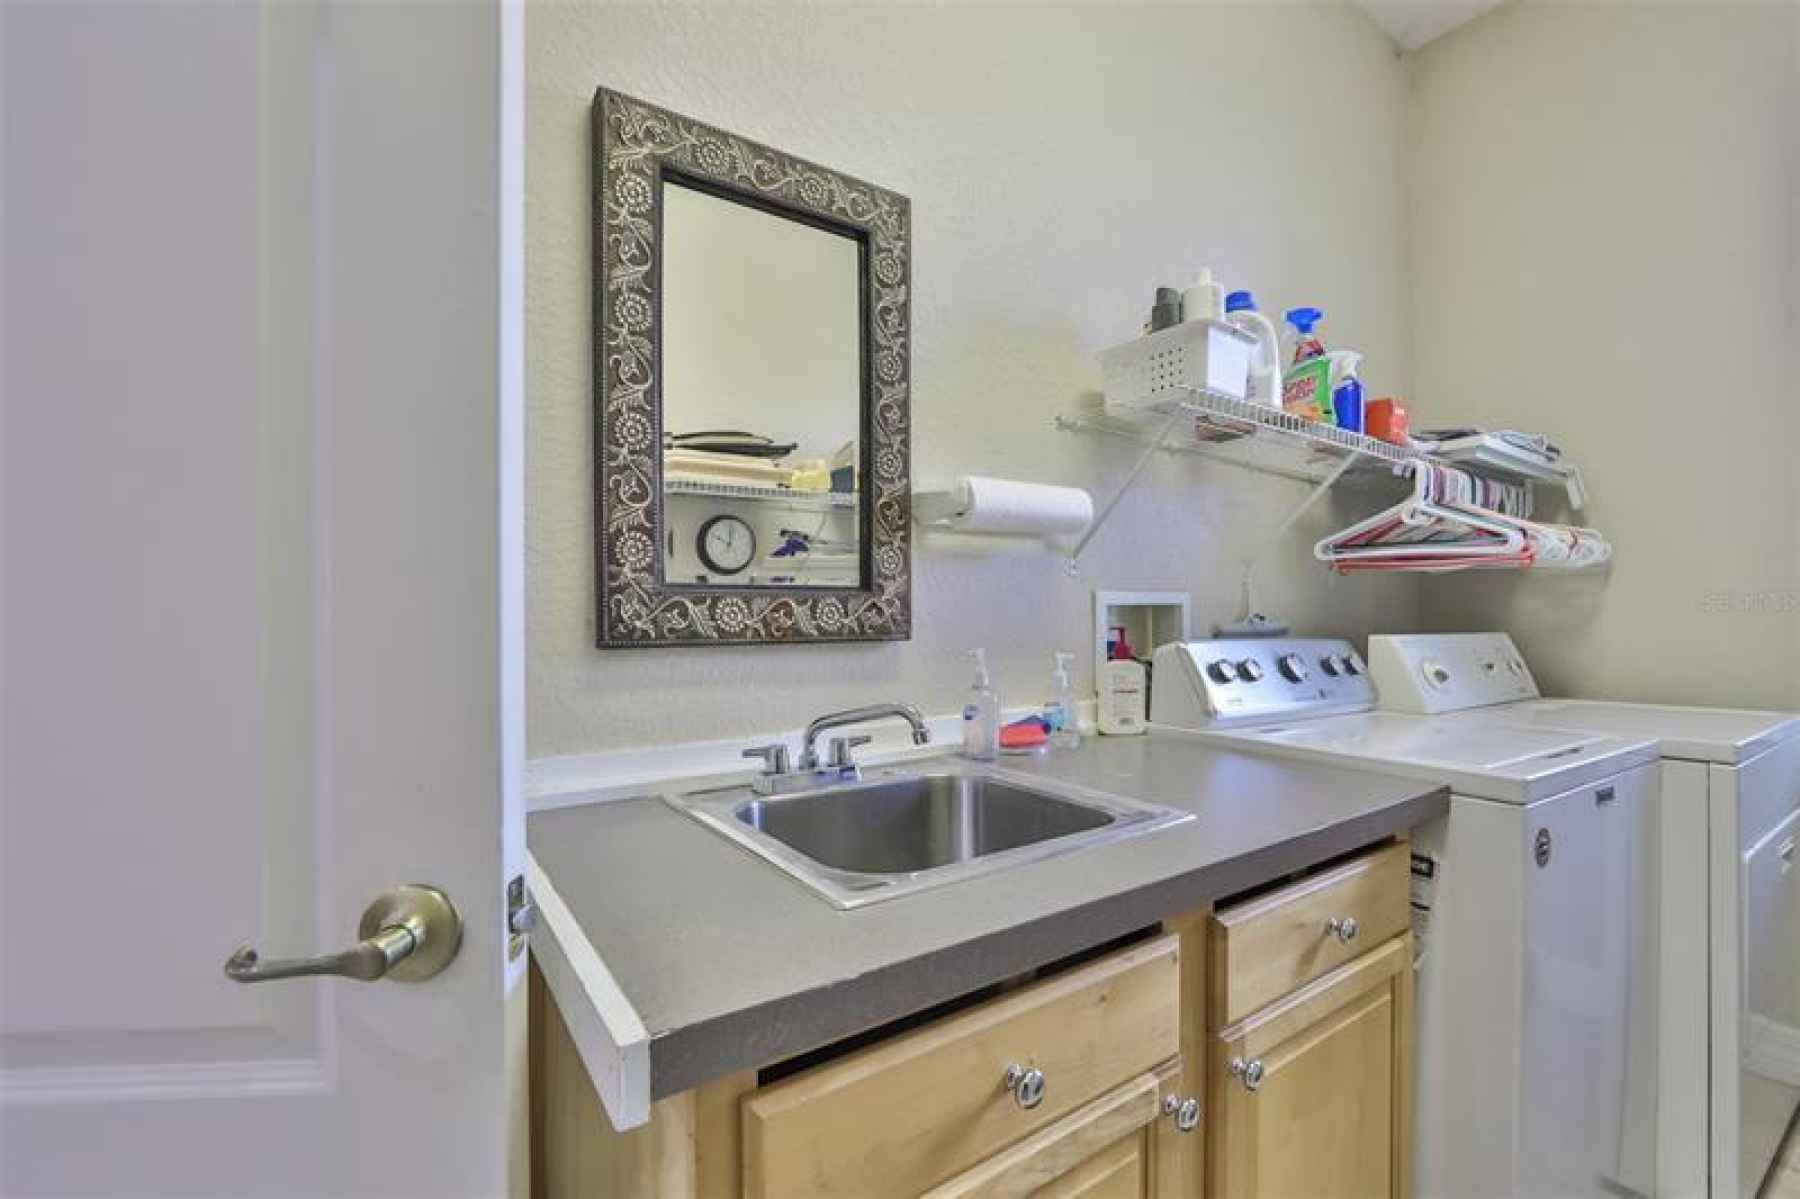 Private laundry room with sink and storage also includes garage door entrance.